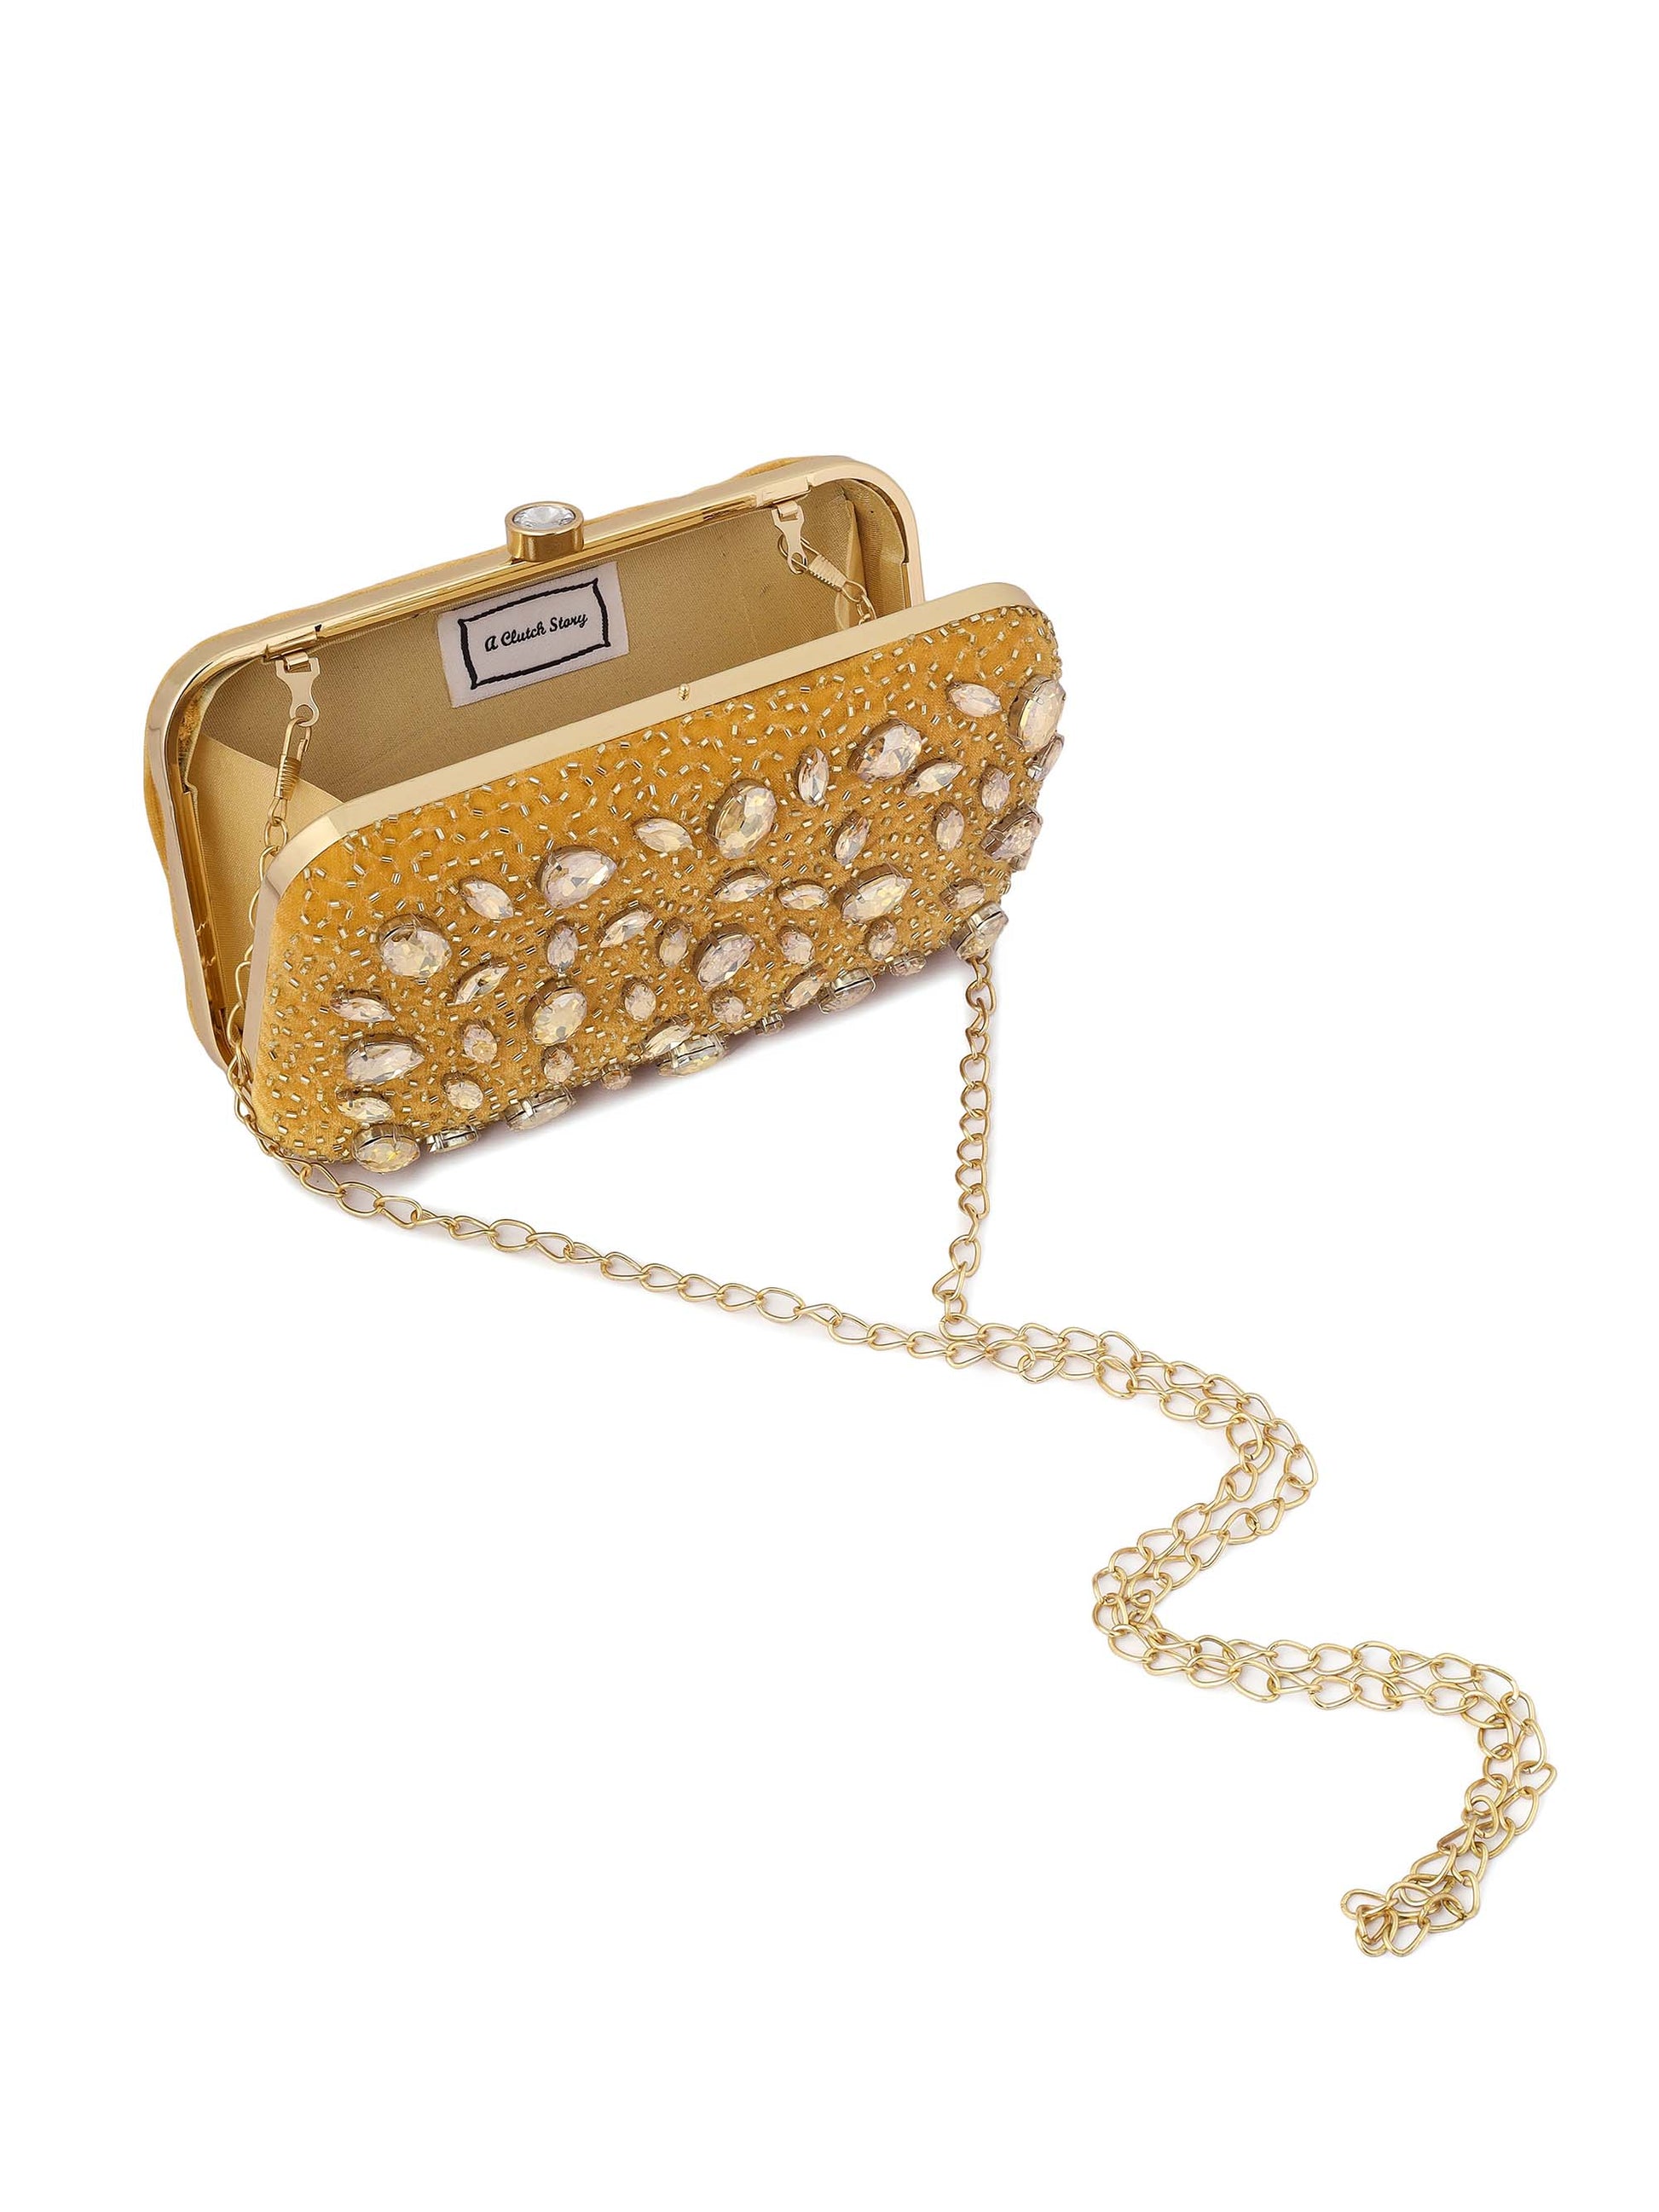 Mustard Crystal Studded Clutch with Rhinestones and Bead Work